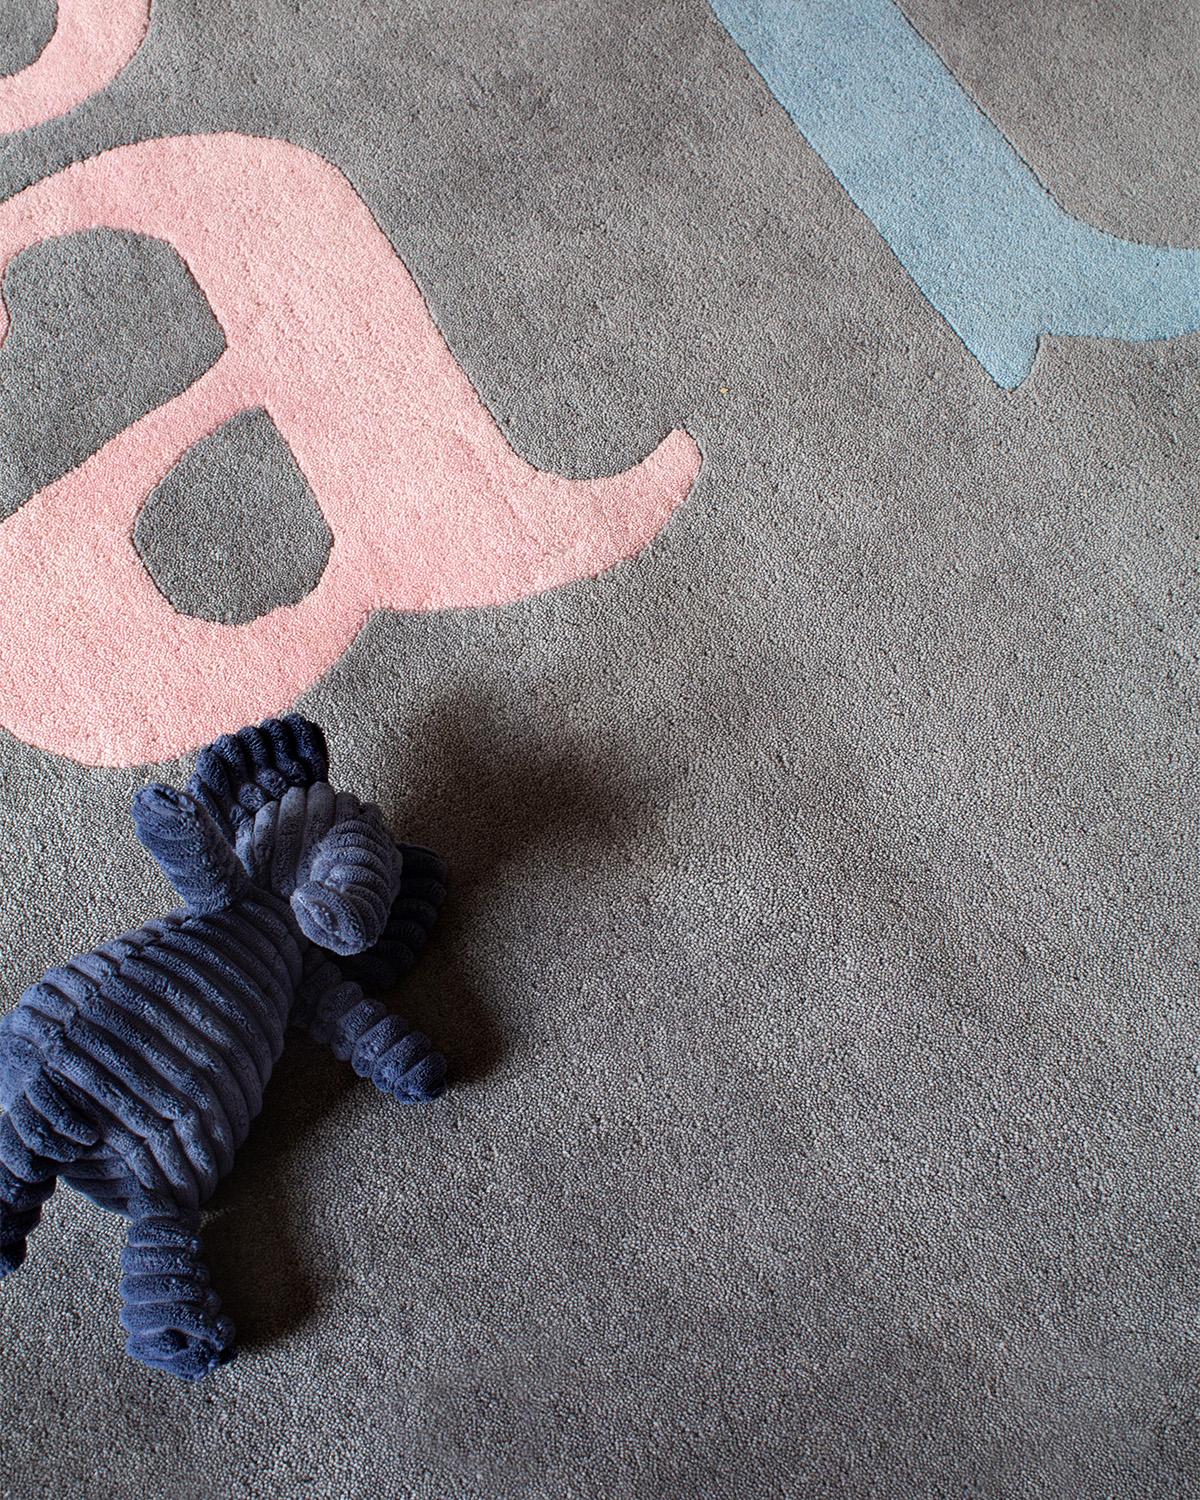 Swedish. It’s a funny language, so why not learn it young! This is åbc. Our first kid friendly rug that puts learning at your kids feet. The Minimalist design is meant to inspire curiosity for languages for both children and adults. The rug is woven